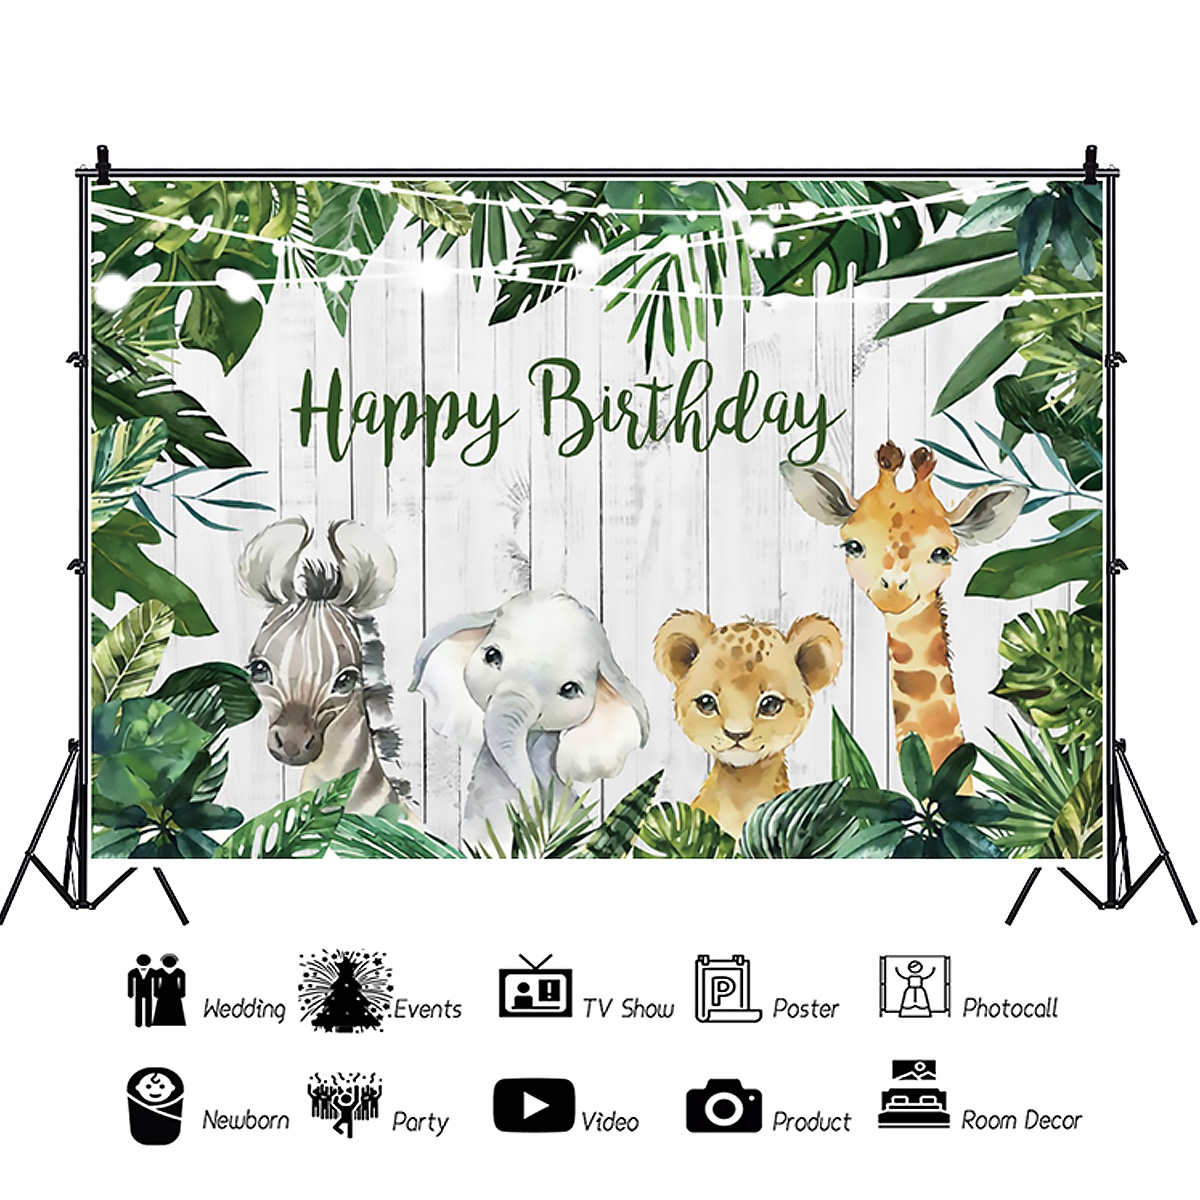 3-Size-Jungle-Green-Forest-Backdrop-Happy-Birthday-Background-Photography-Woodland-Party-Prop-1876181-2